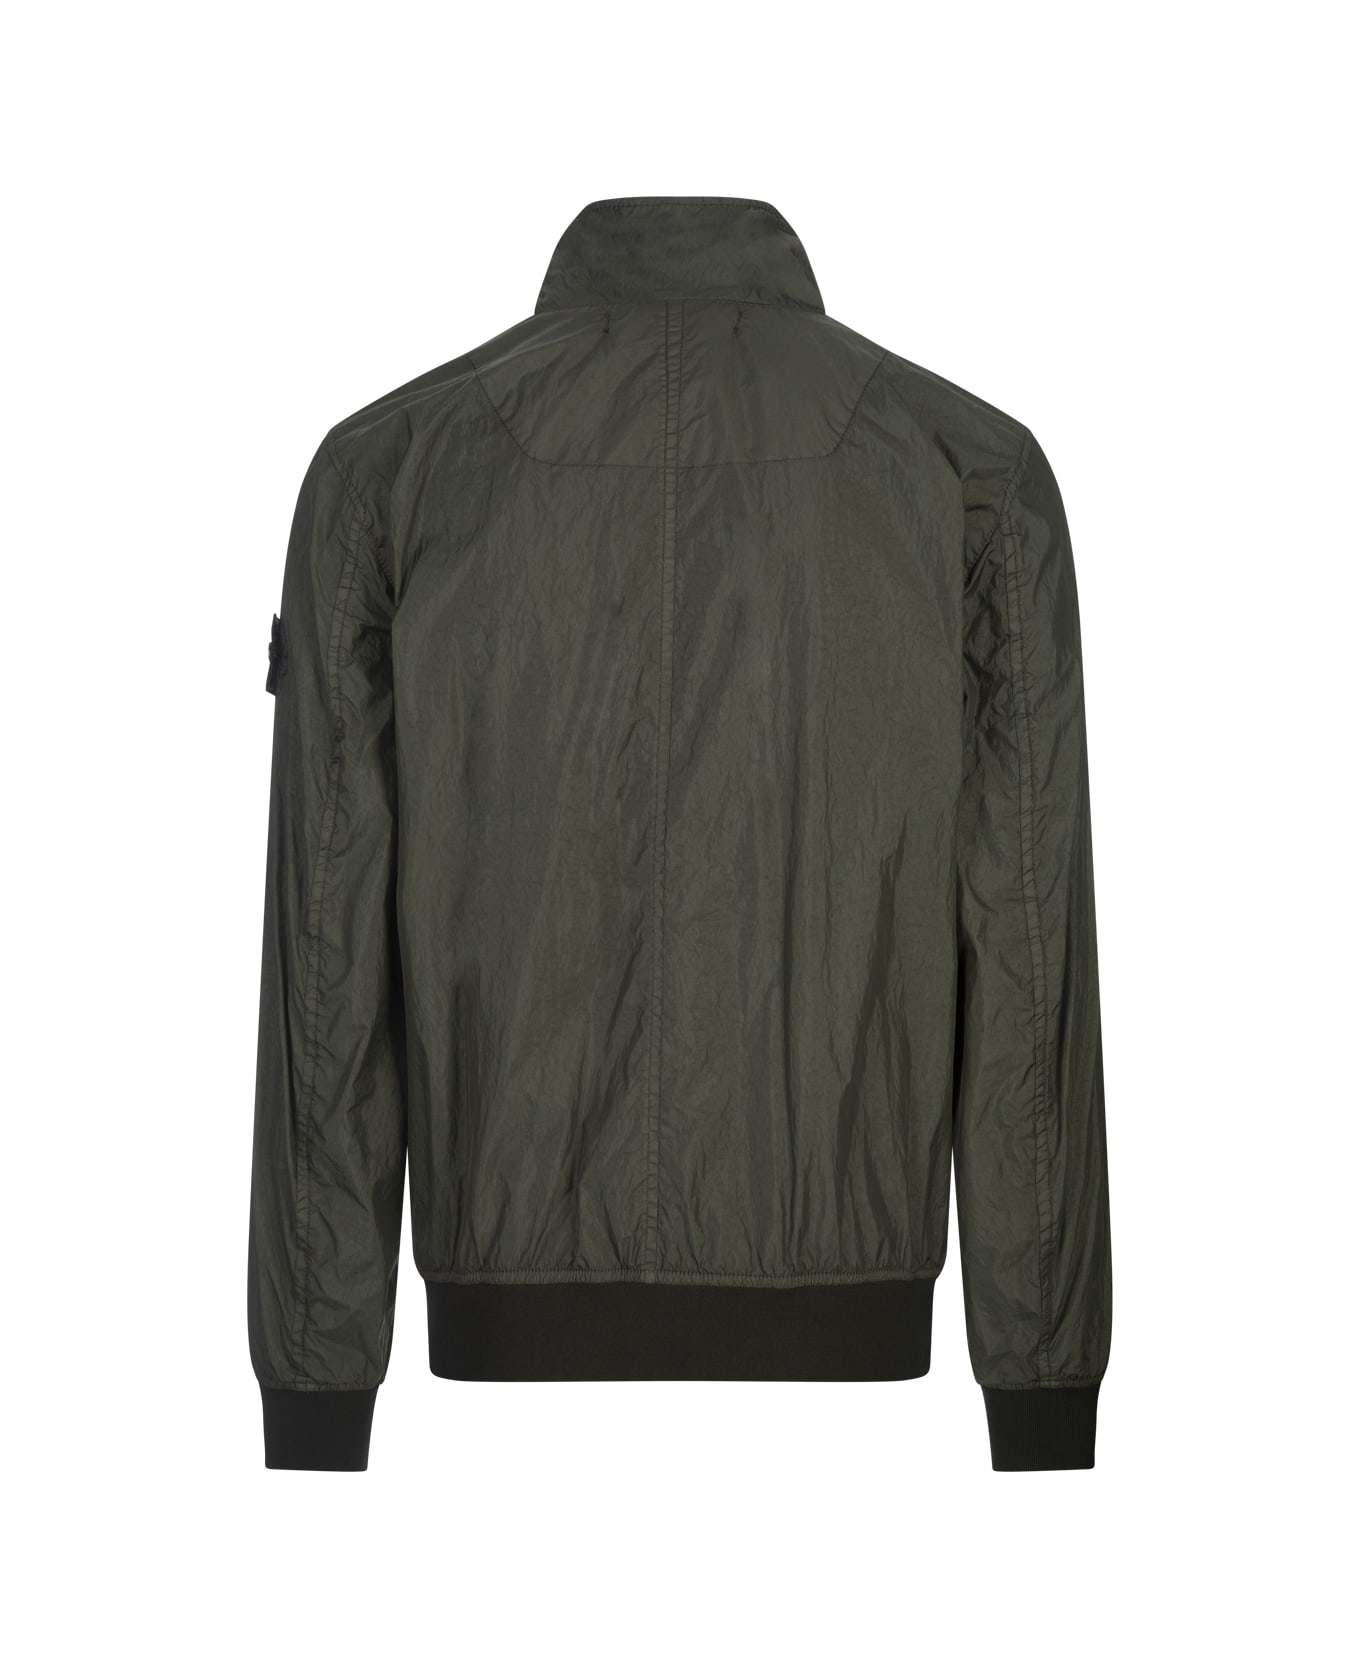 Stone Island Garment Dyed Crinkle Reps R-ny Jacket In Green - Green